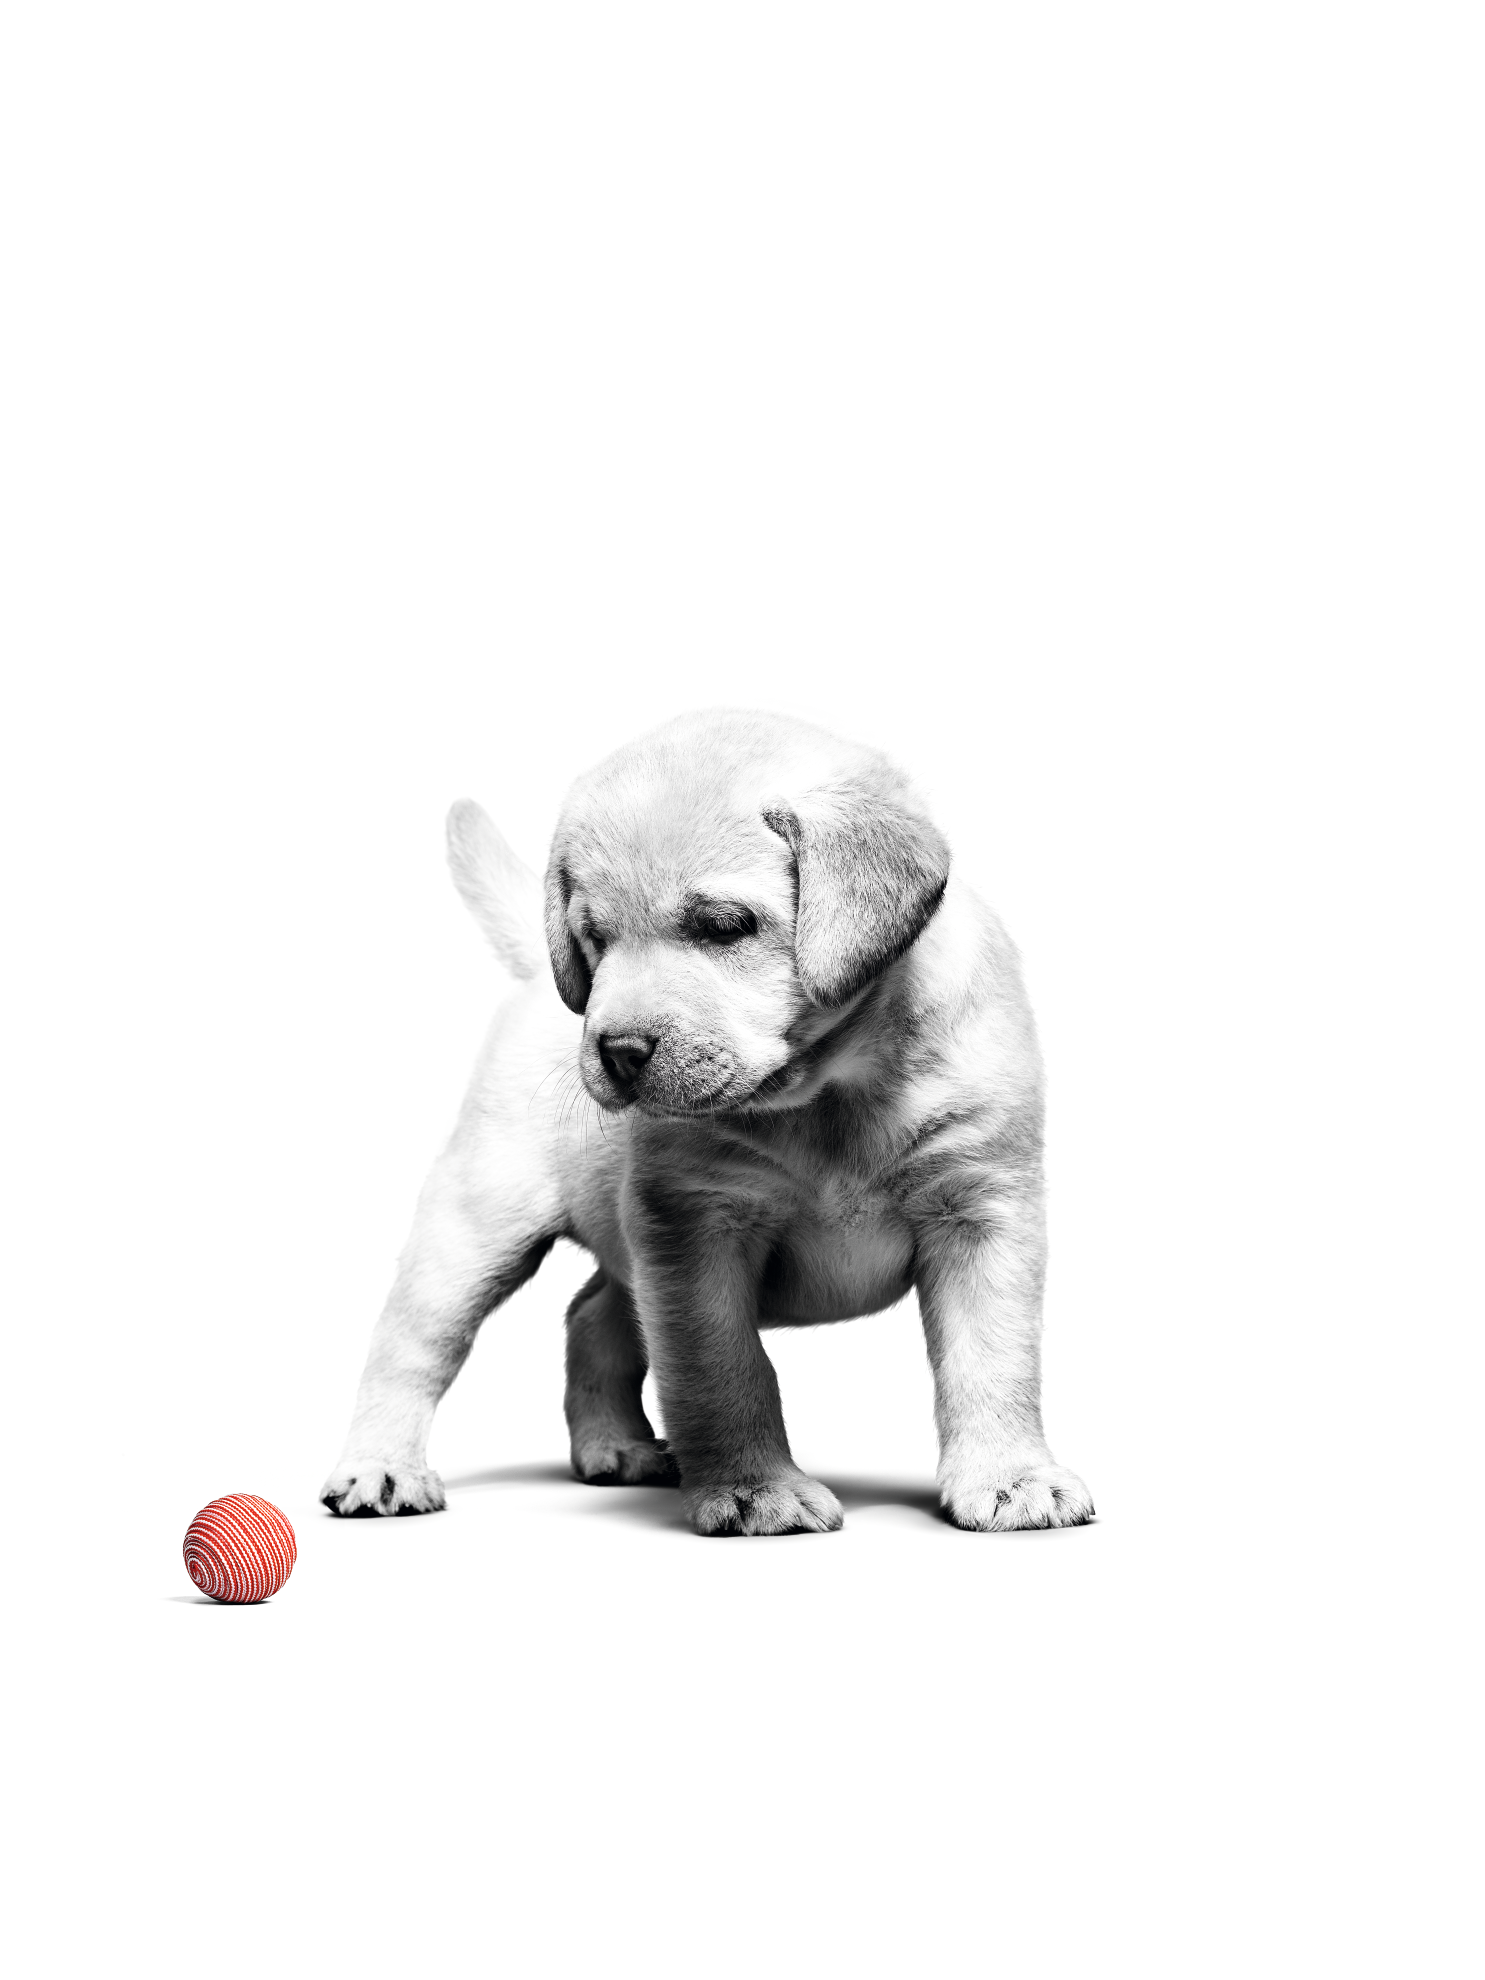 Labrador Retriever puppy in black and white with a red ball